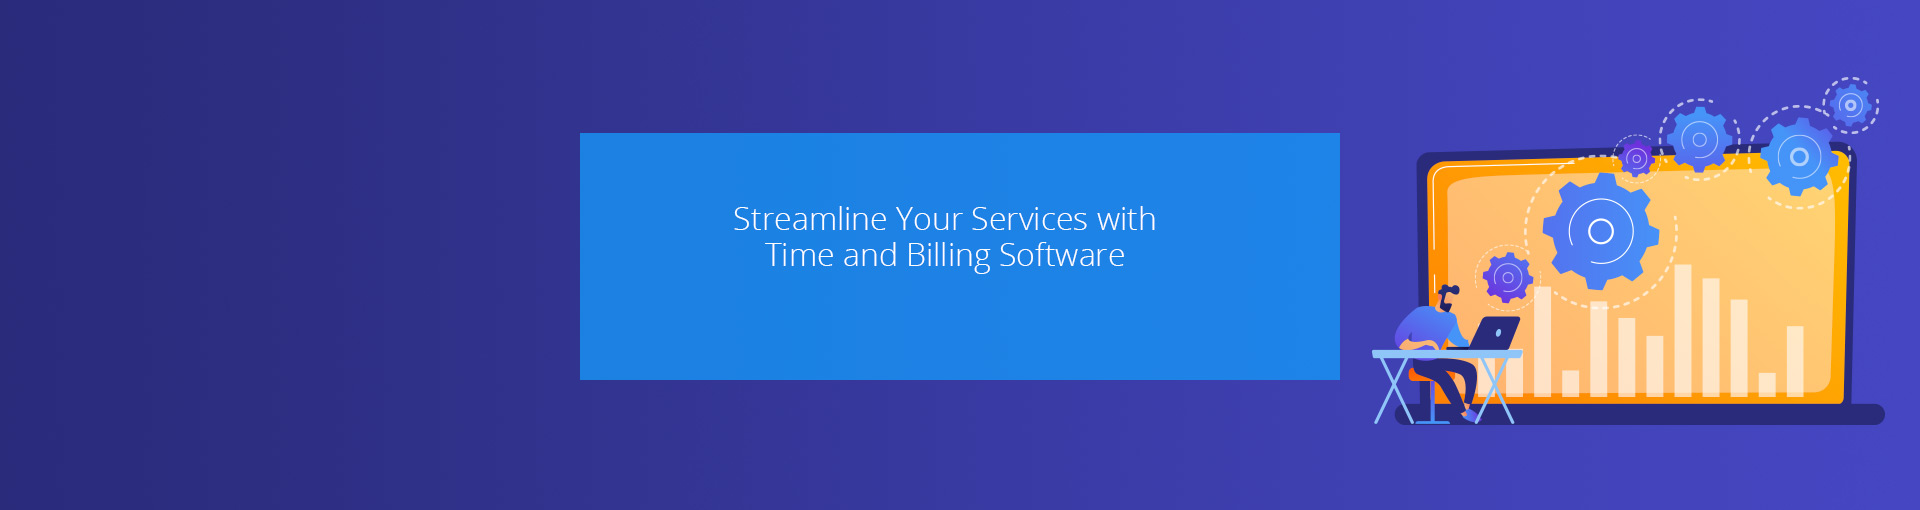 Streamline Your Services with Time and Billing Software Featured Image